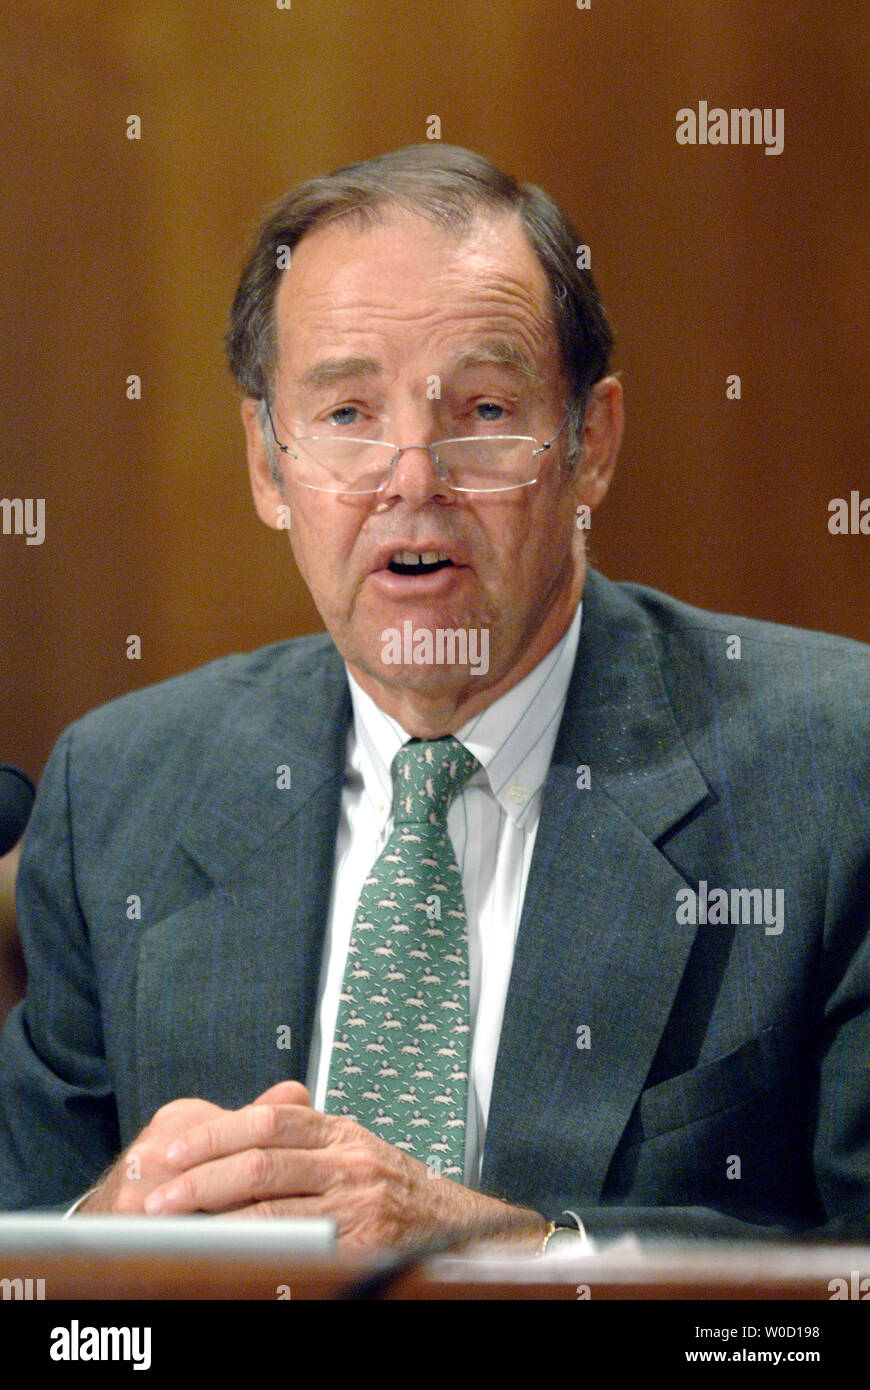 Former Governor of New Jersey and Chairman of the 9/11 Commission Thomas Kean testifies before a Senate Permanent Subcommittee on Investigations hearing on nuclear and radiological threats to the United States, in Washington on March 28, 2006  (UPI Photo/Kevin Dietsch) Stock Photo